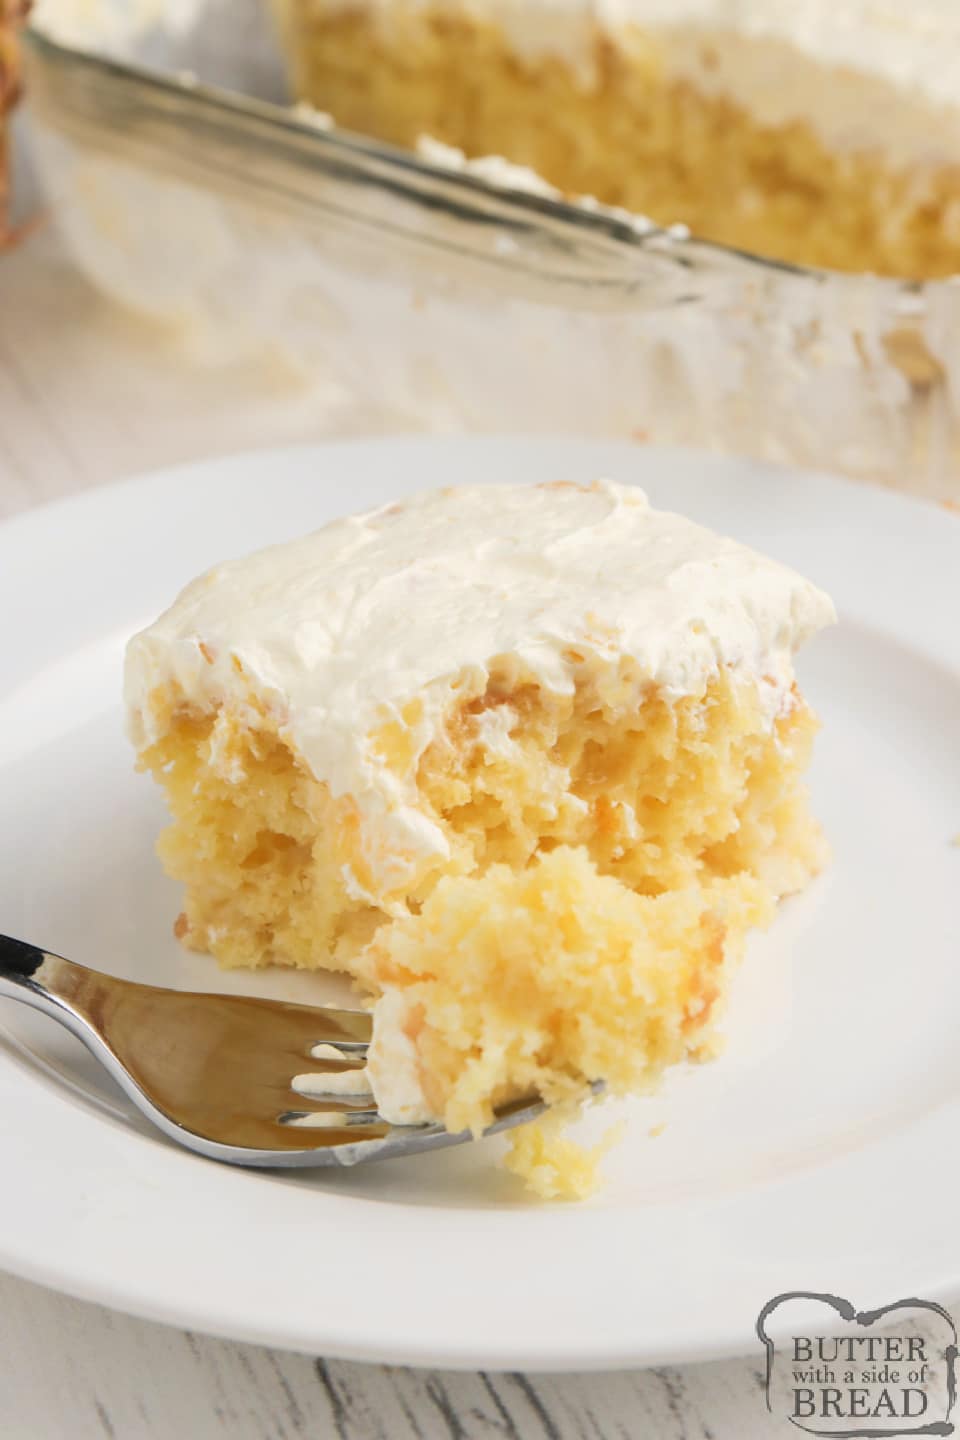 Pina Colada Poke Cake made with a cake mix, crushed pineapple and a delicious, creamy pina colada sauce. Easy poke cake recipe topped with a light, refreshing pineapple pudding topping.